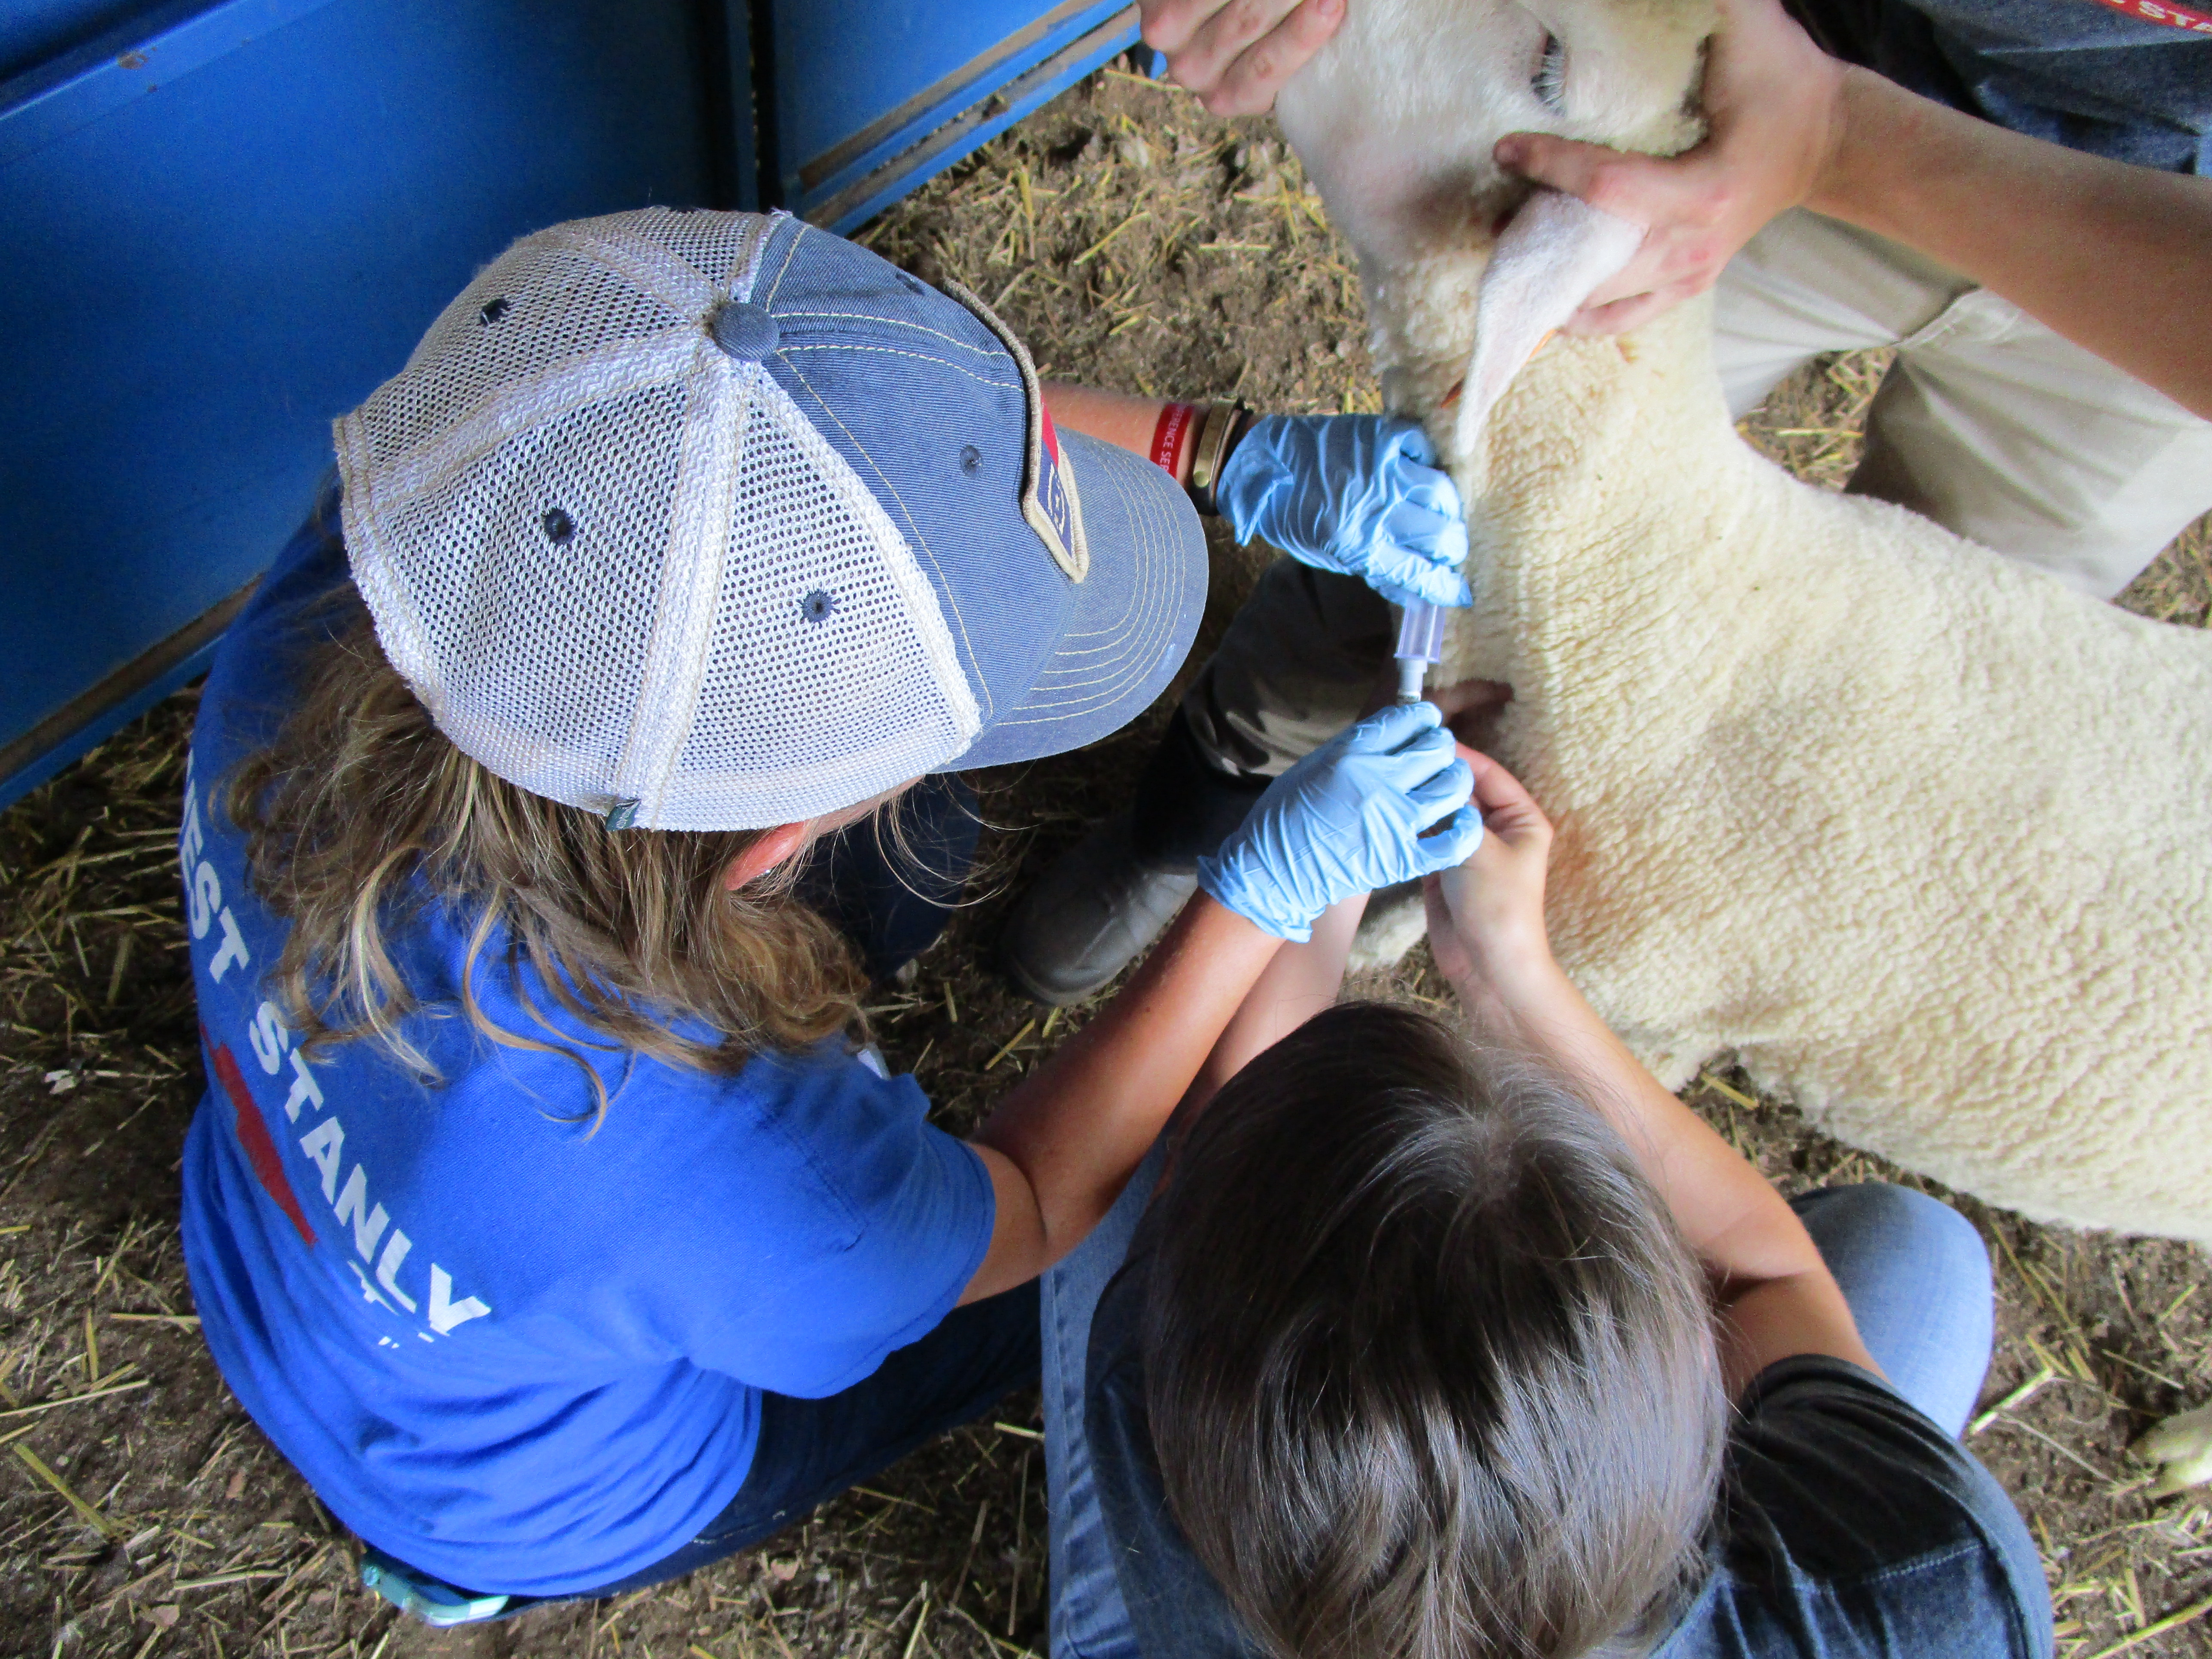 Campers work together to learn to take a blood sample from a sheep to investigate its health status.